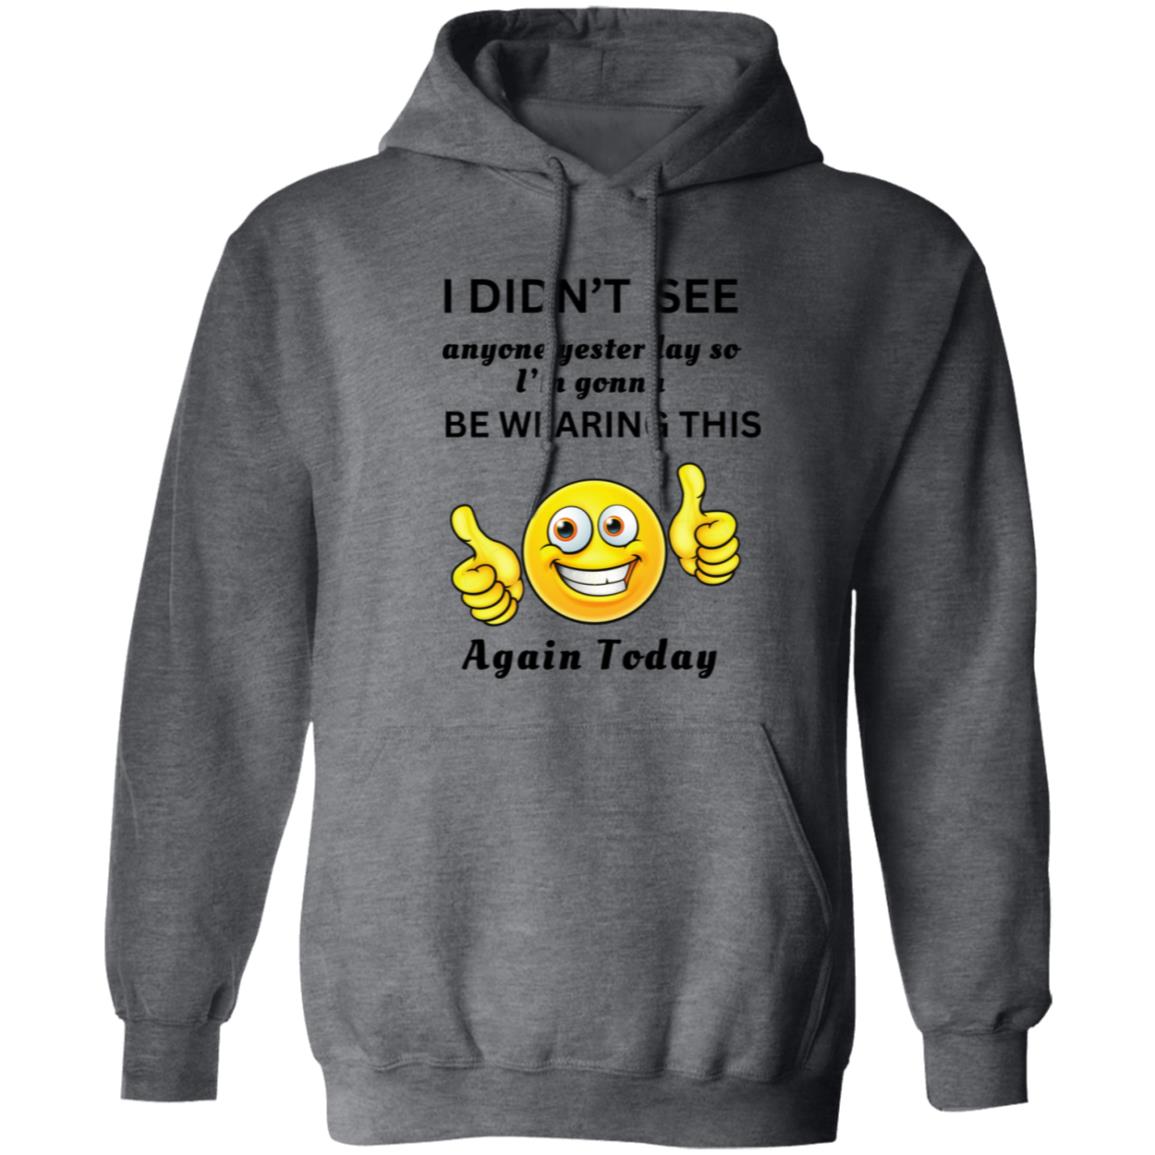 I DIDN’T SEE ANYONE YESTERDAY... (UNISEX) HOODIE